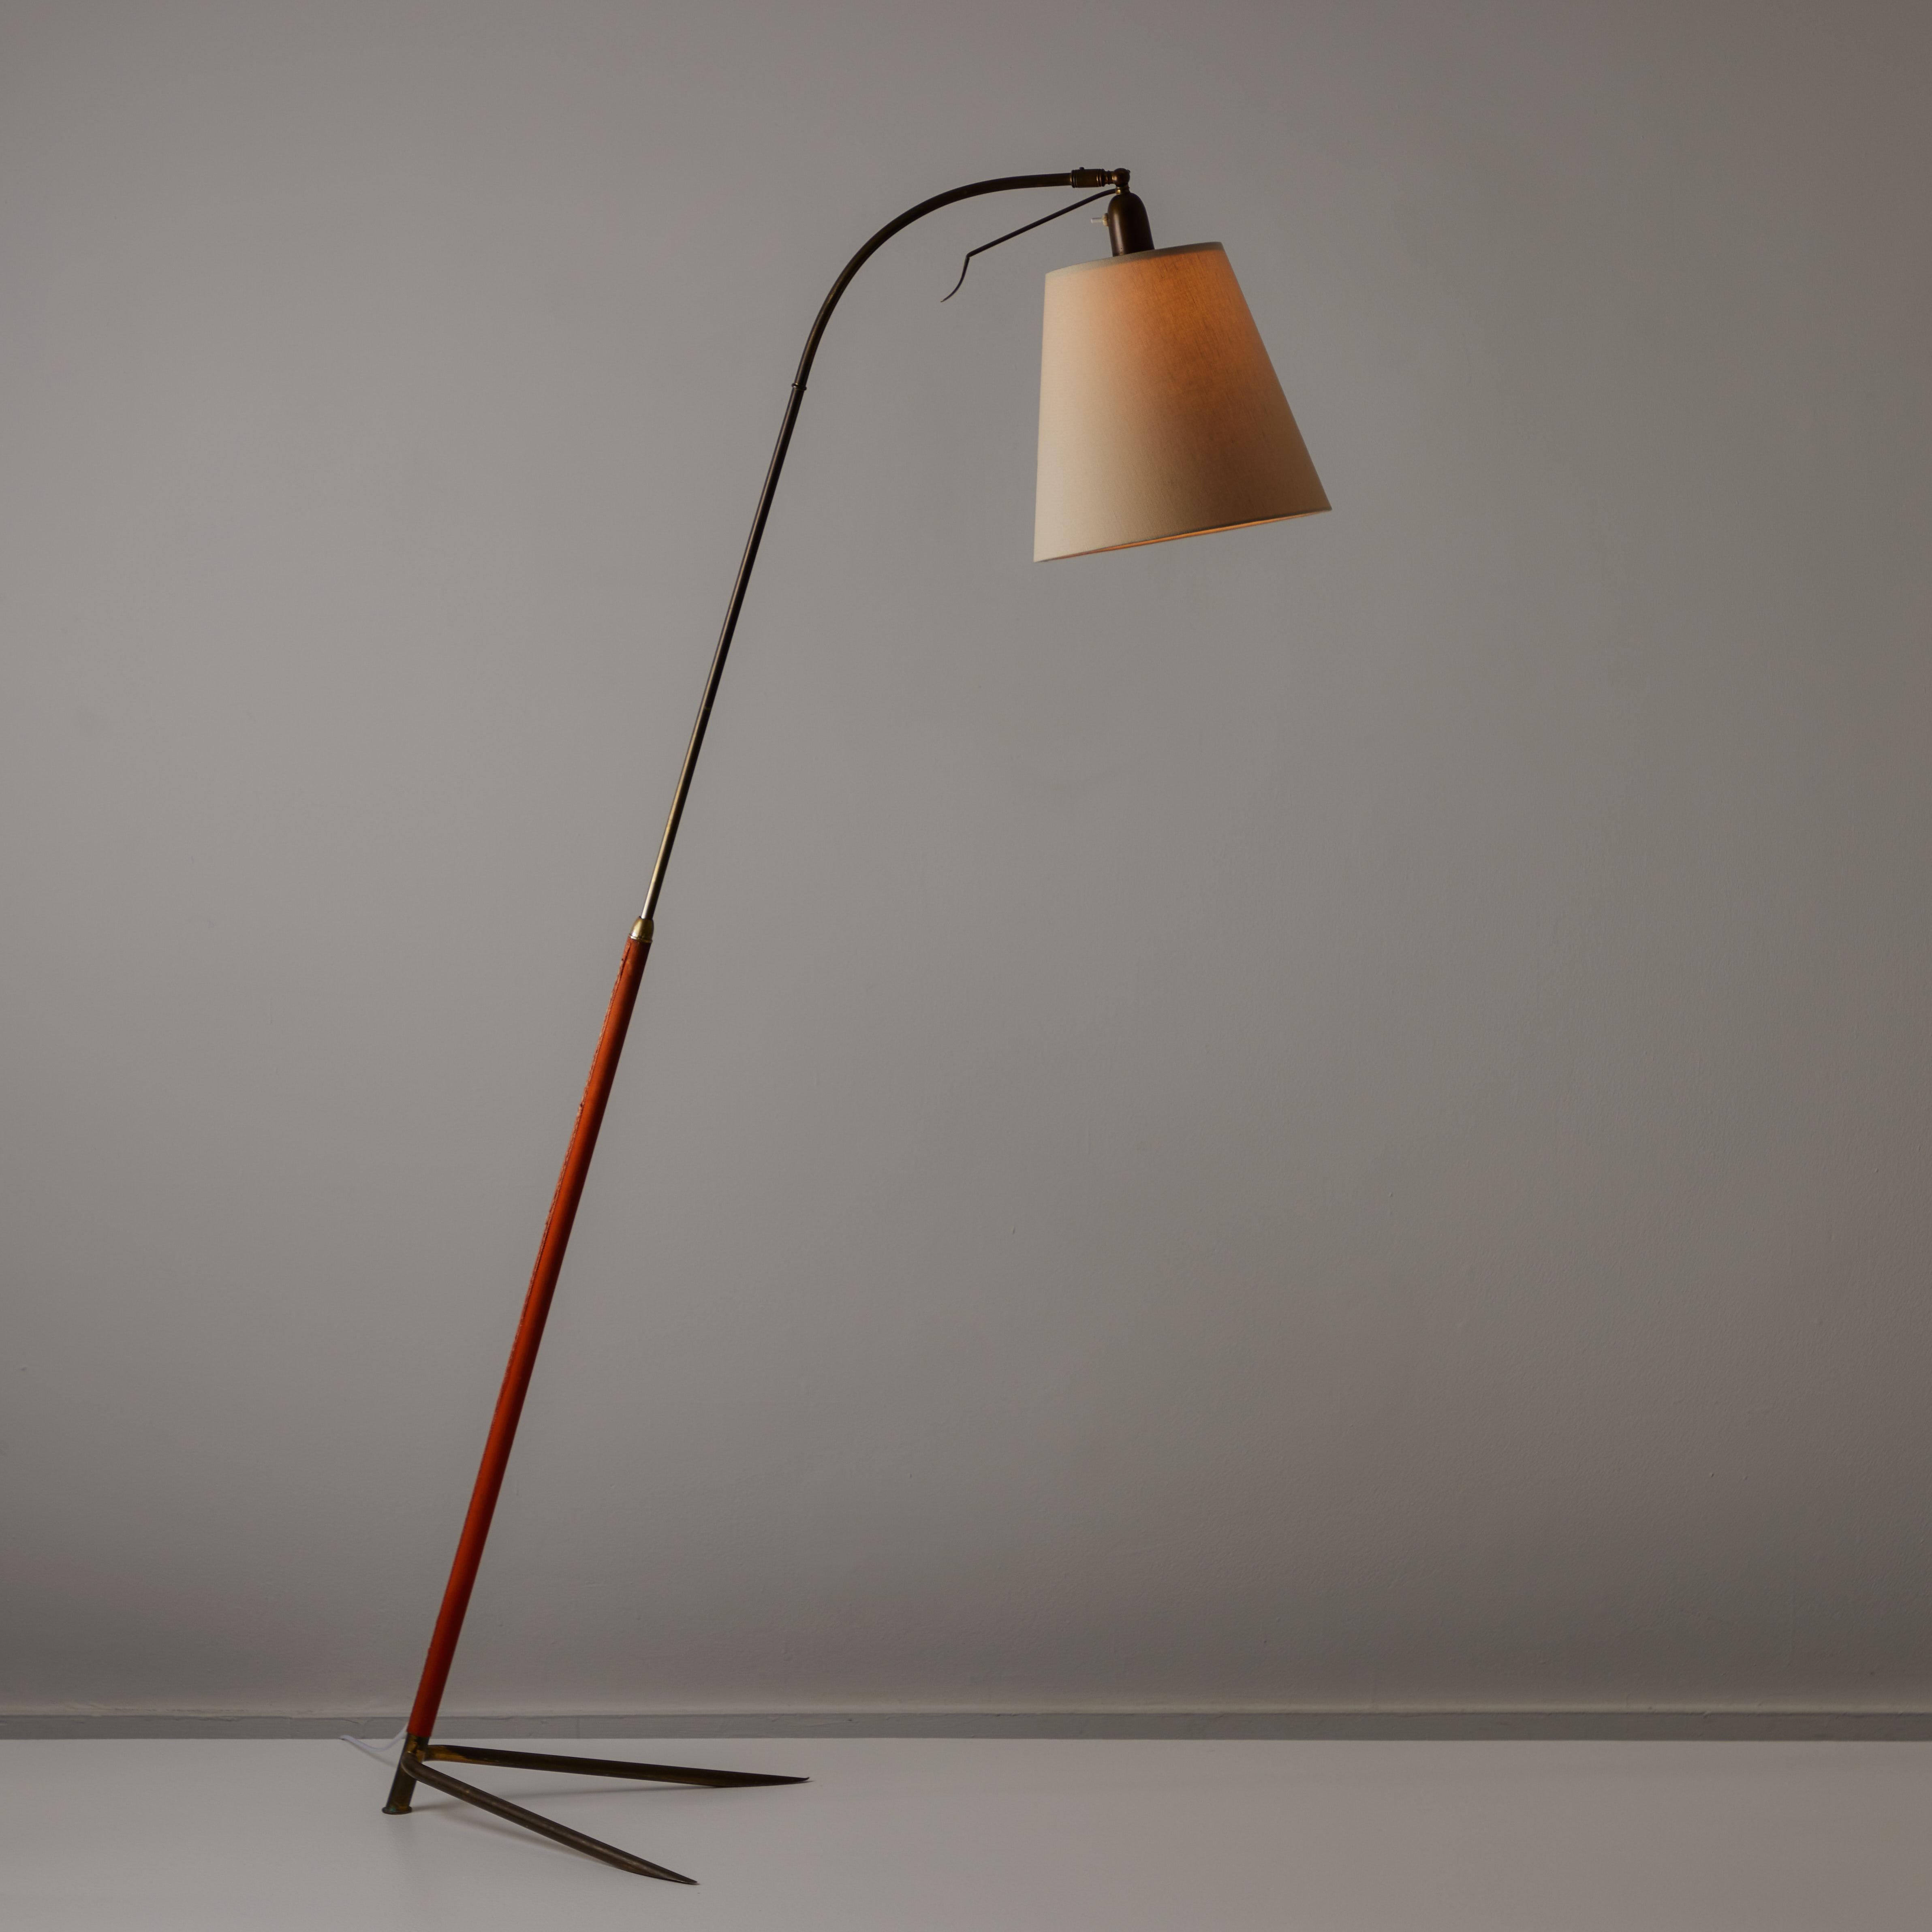 Italian Floor Lamp. Designed and manufactured in Italy, circa the 1950s. This detailed floor lamp features an orange leather wrapped detail on the brass stem and a linen shade. The lamp shade can be articulated in and outward with the brass control